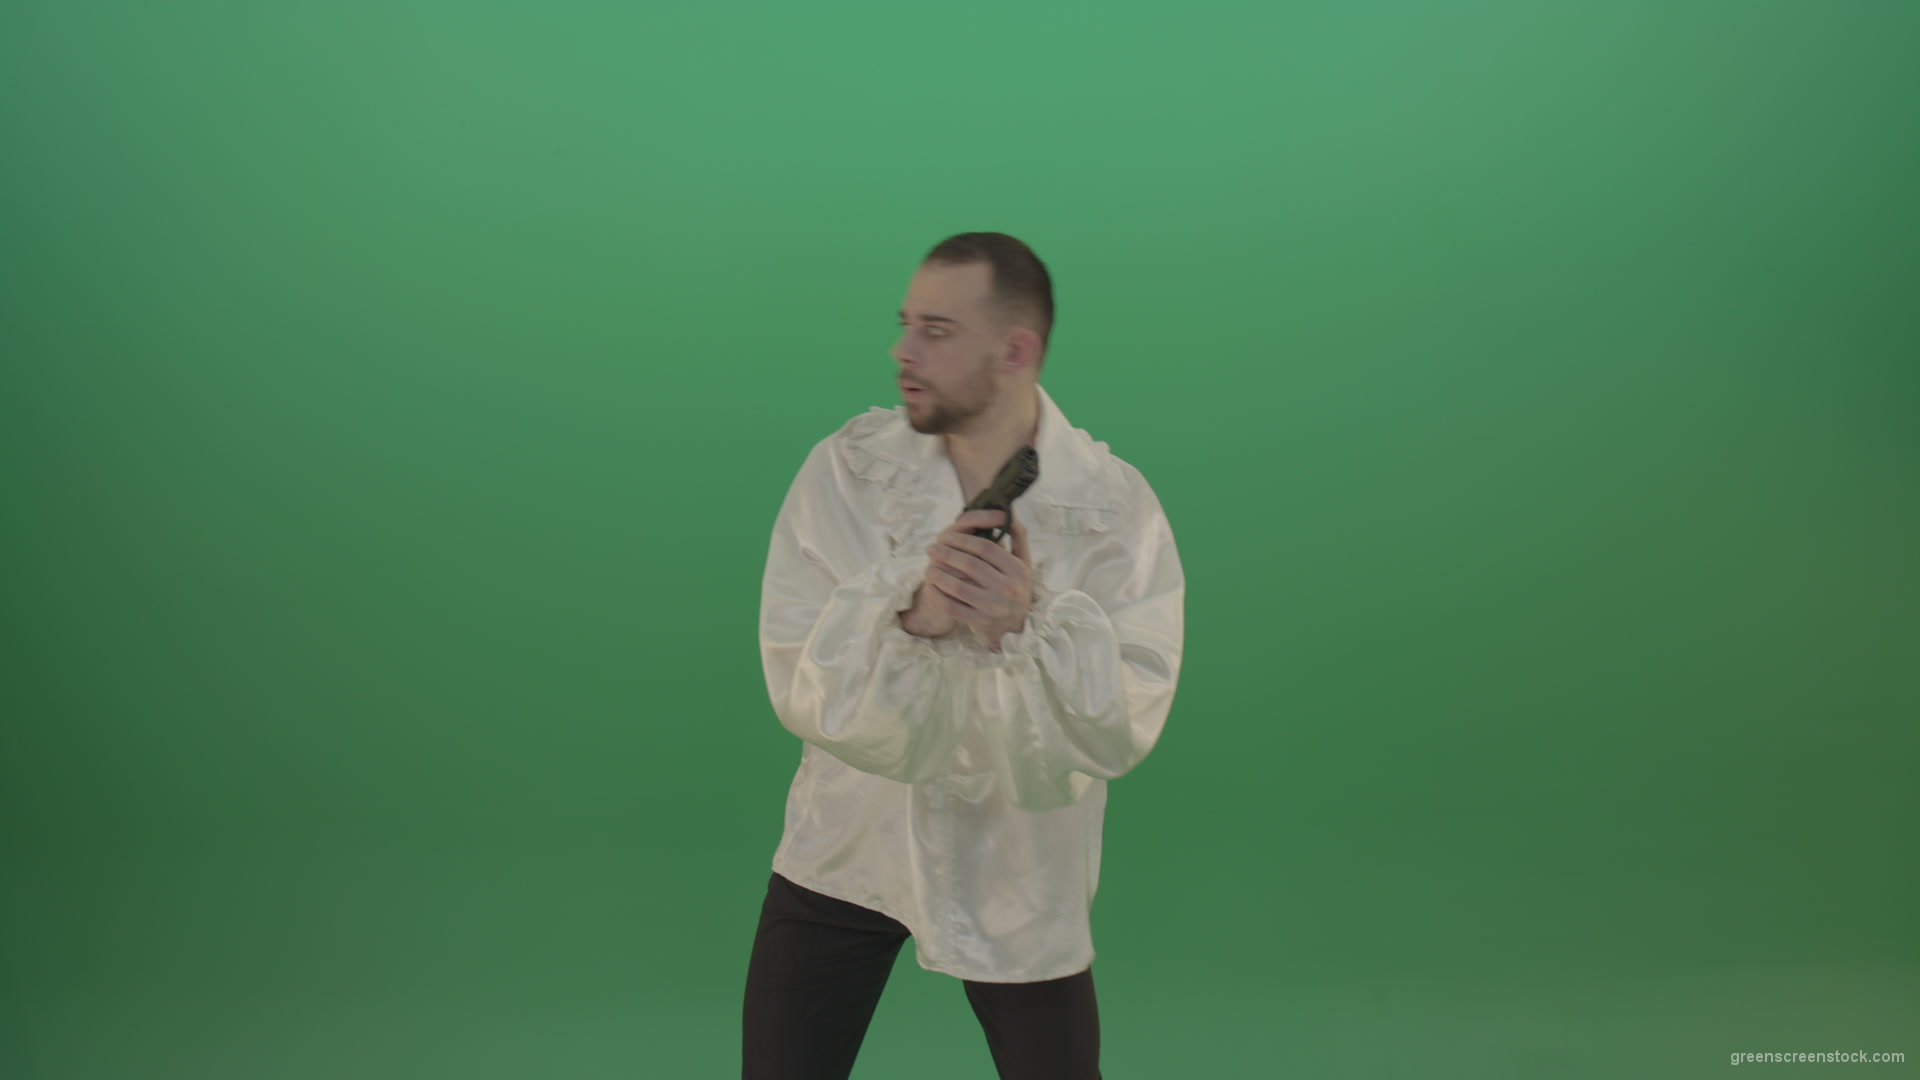 Man-in-white-shirt-shooting-with-pistol-hand-gun-isolated-in-green-screen-studio_004 Green Screen Stock